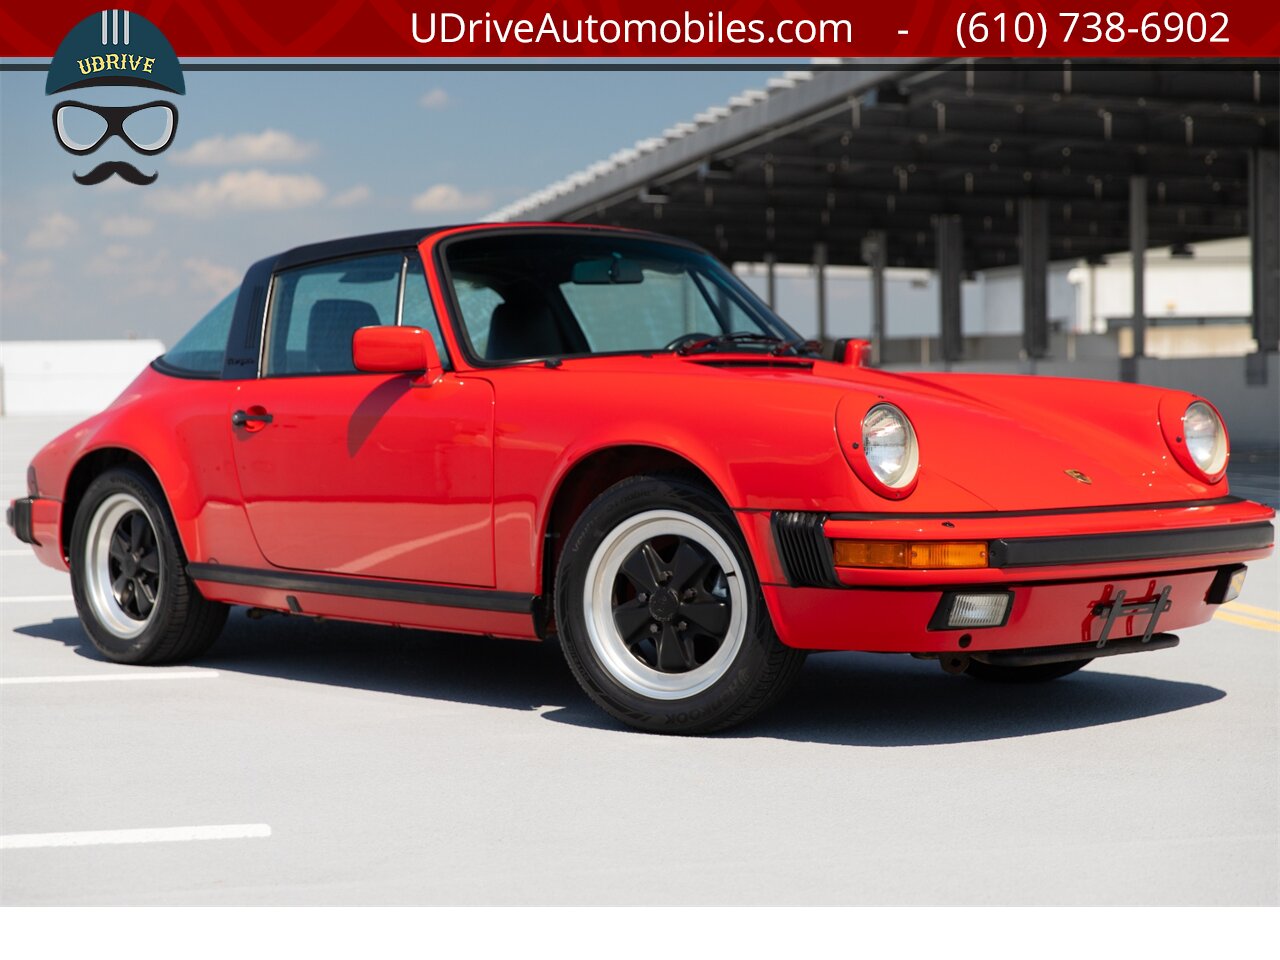 1986 Porsche 911 Carrera Targa 39k Miles Same Owner Since 1988  $23k in Service History Since 2011 - Photo 4 - West Chester, PA 19382